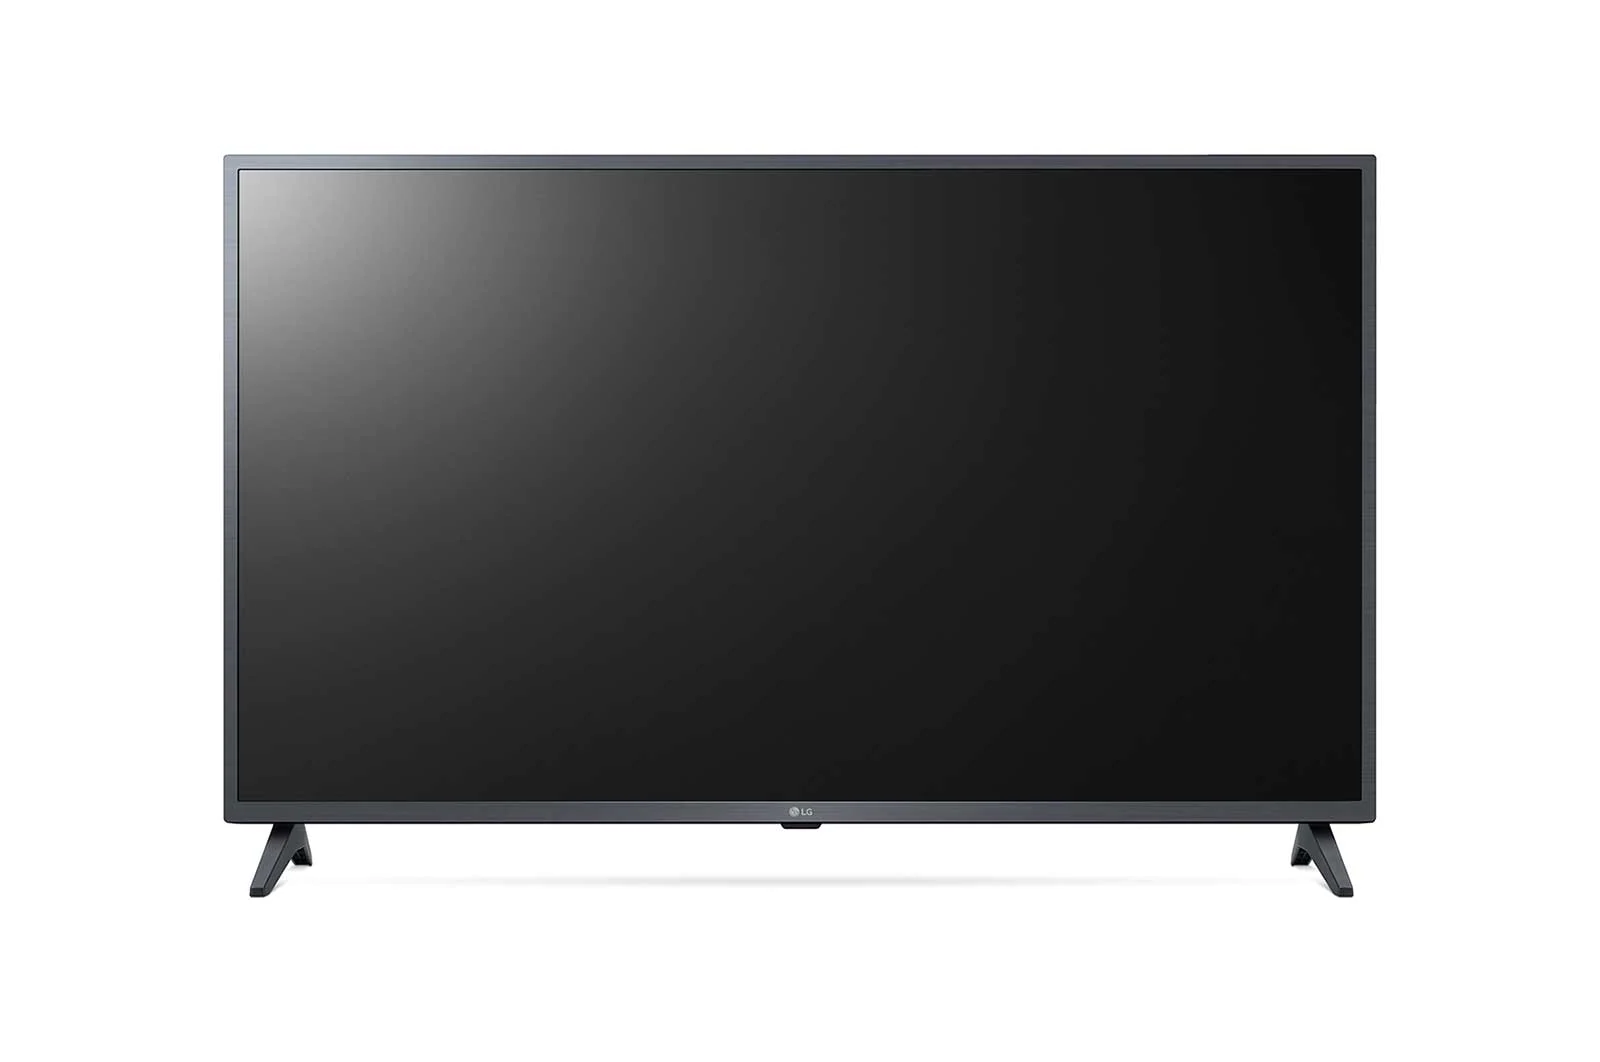 LG UHD TV (43") With LG's Cinematic 4K Active HDR Screen Design